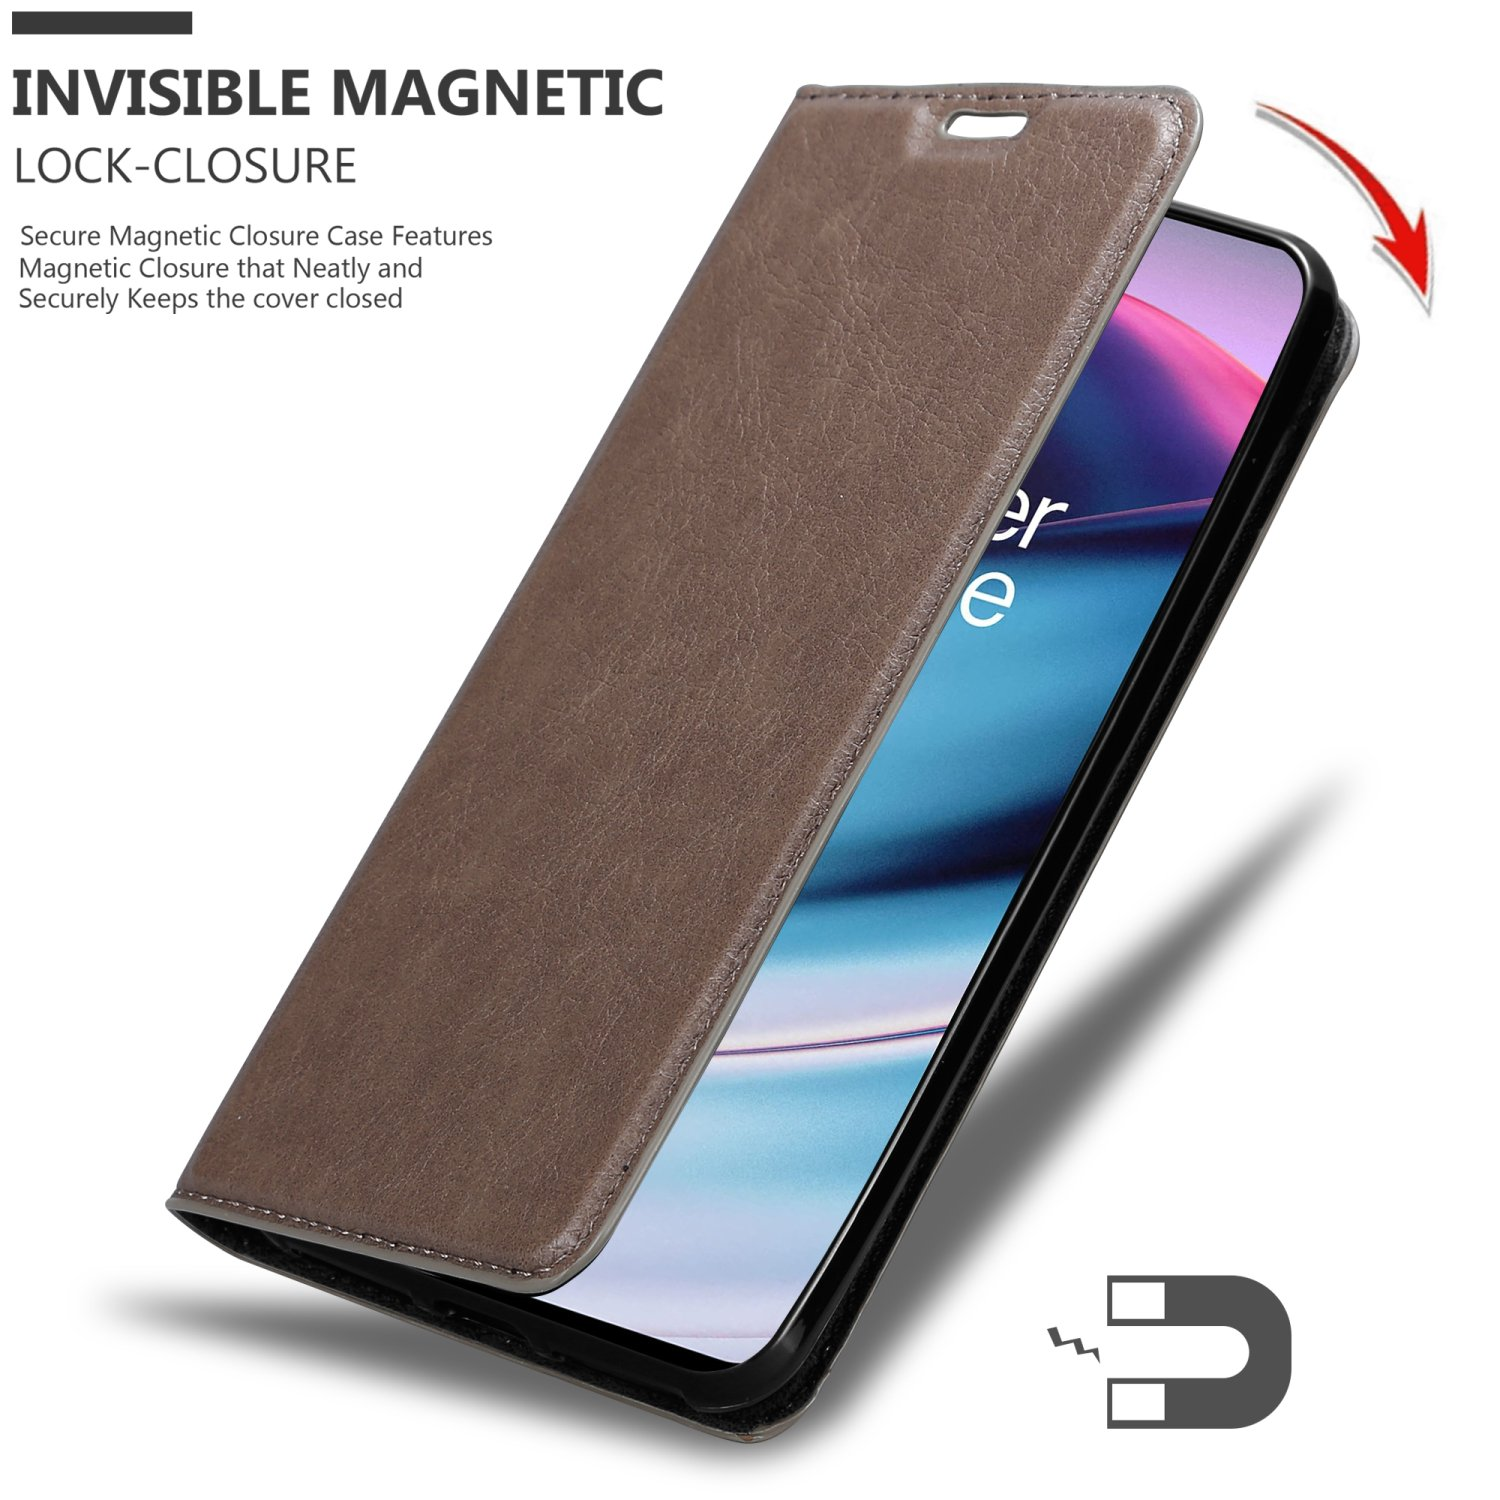 Hülle BRAUN Nord Invisible 5G, KAFFEE Book Magnet, OnePlus, CE Bookcover, CADORABO